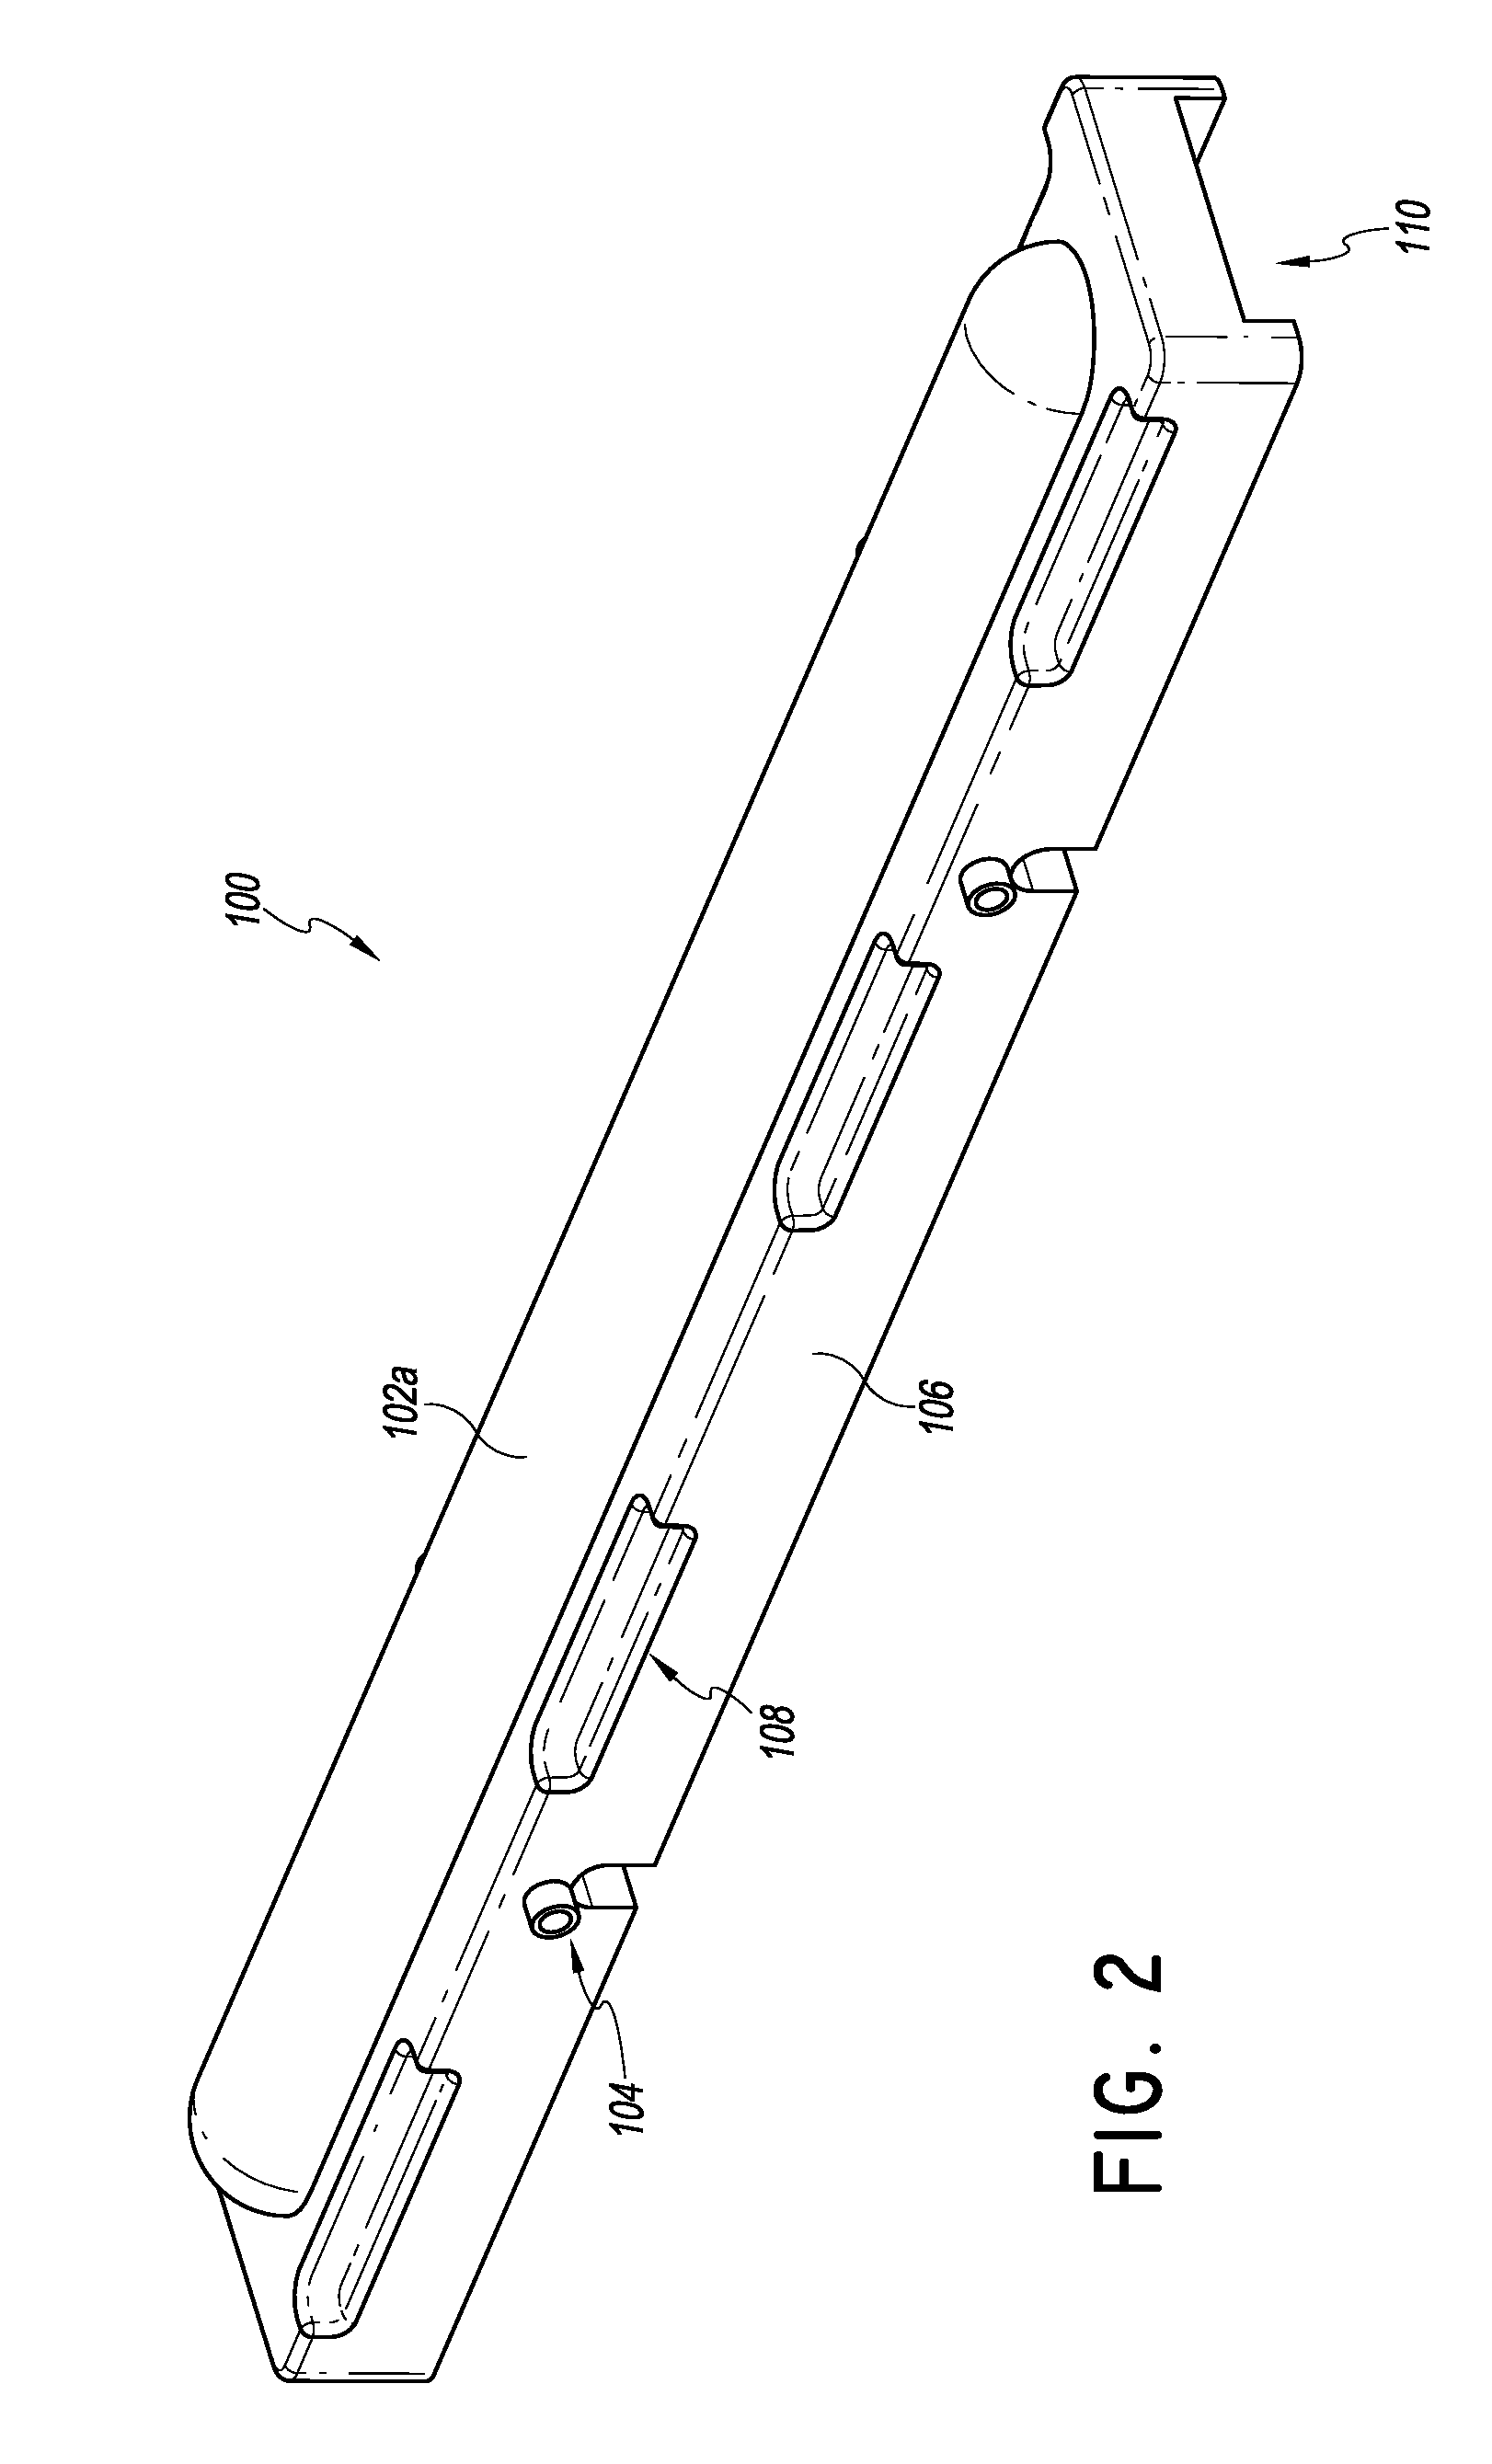 Linear LED module and socket for same